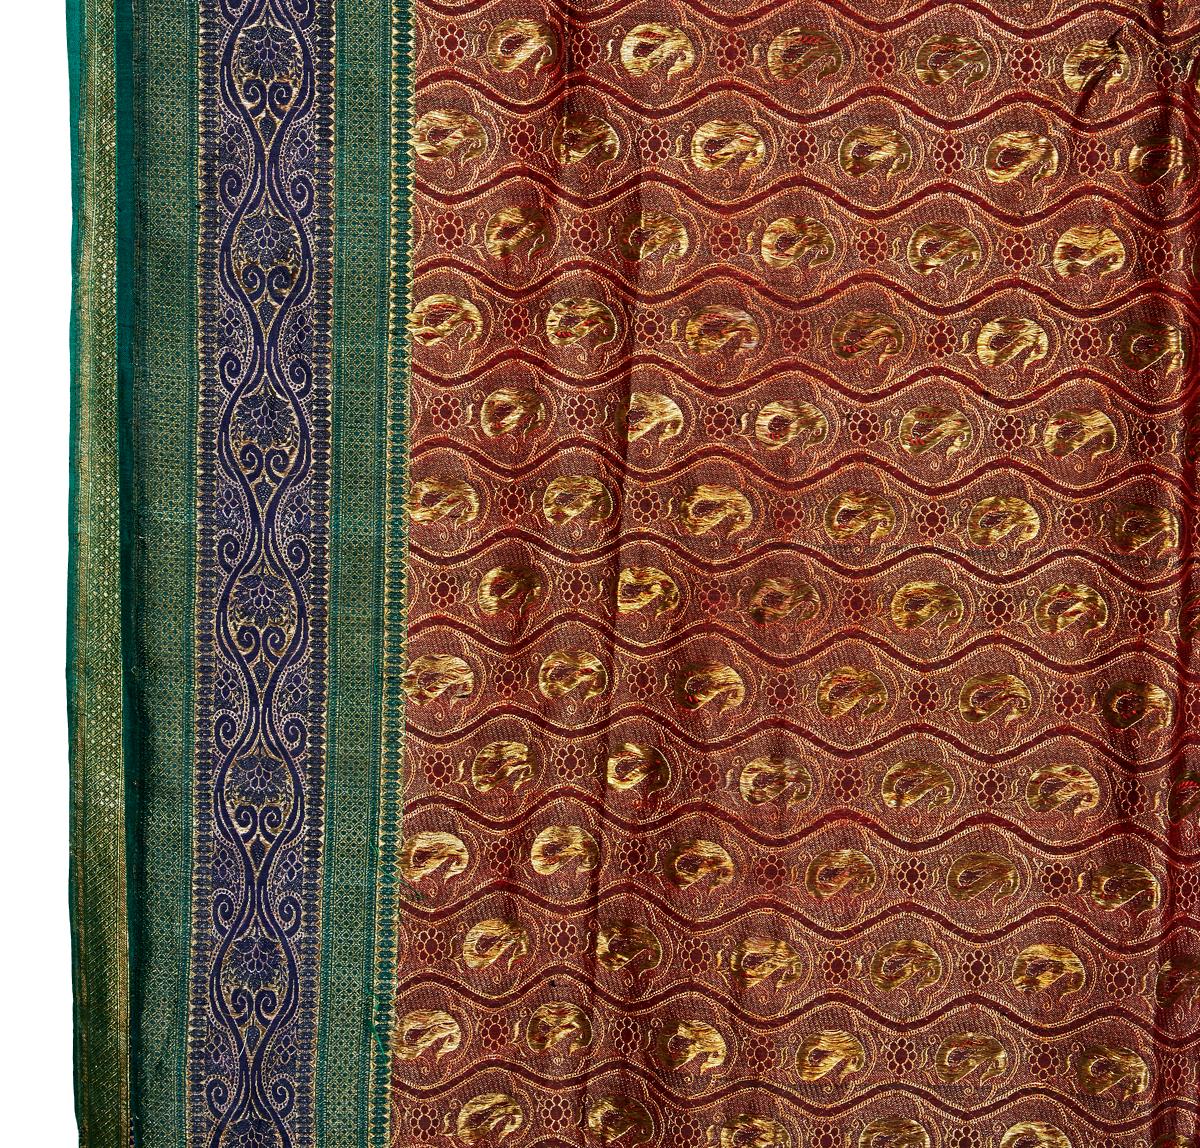 A lavish sari from India, hand-crafted out of a single piece of silk brocade. Mid 20th Century, circa 1970. Gold Paisley brocade on burgundy / deep red silk, with blue, green and gold lateral trim. Fully reversible with opposite colors. 

Can be